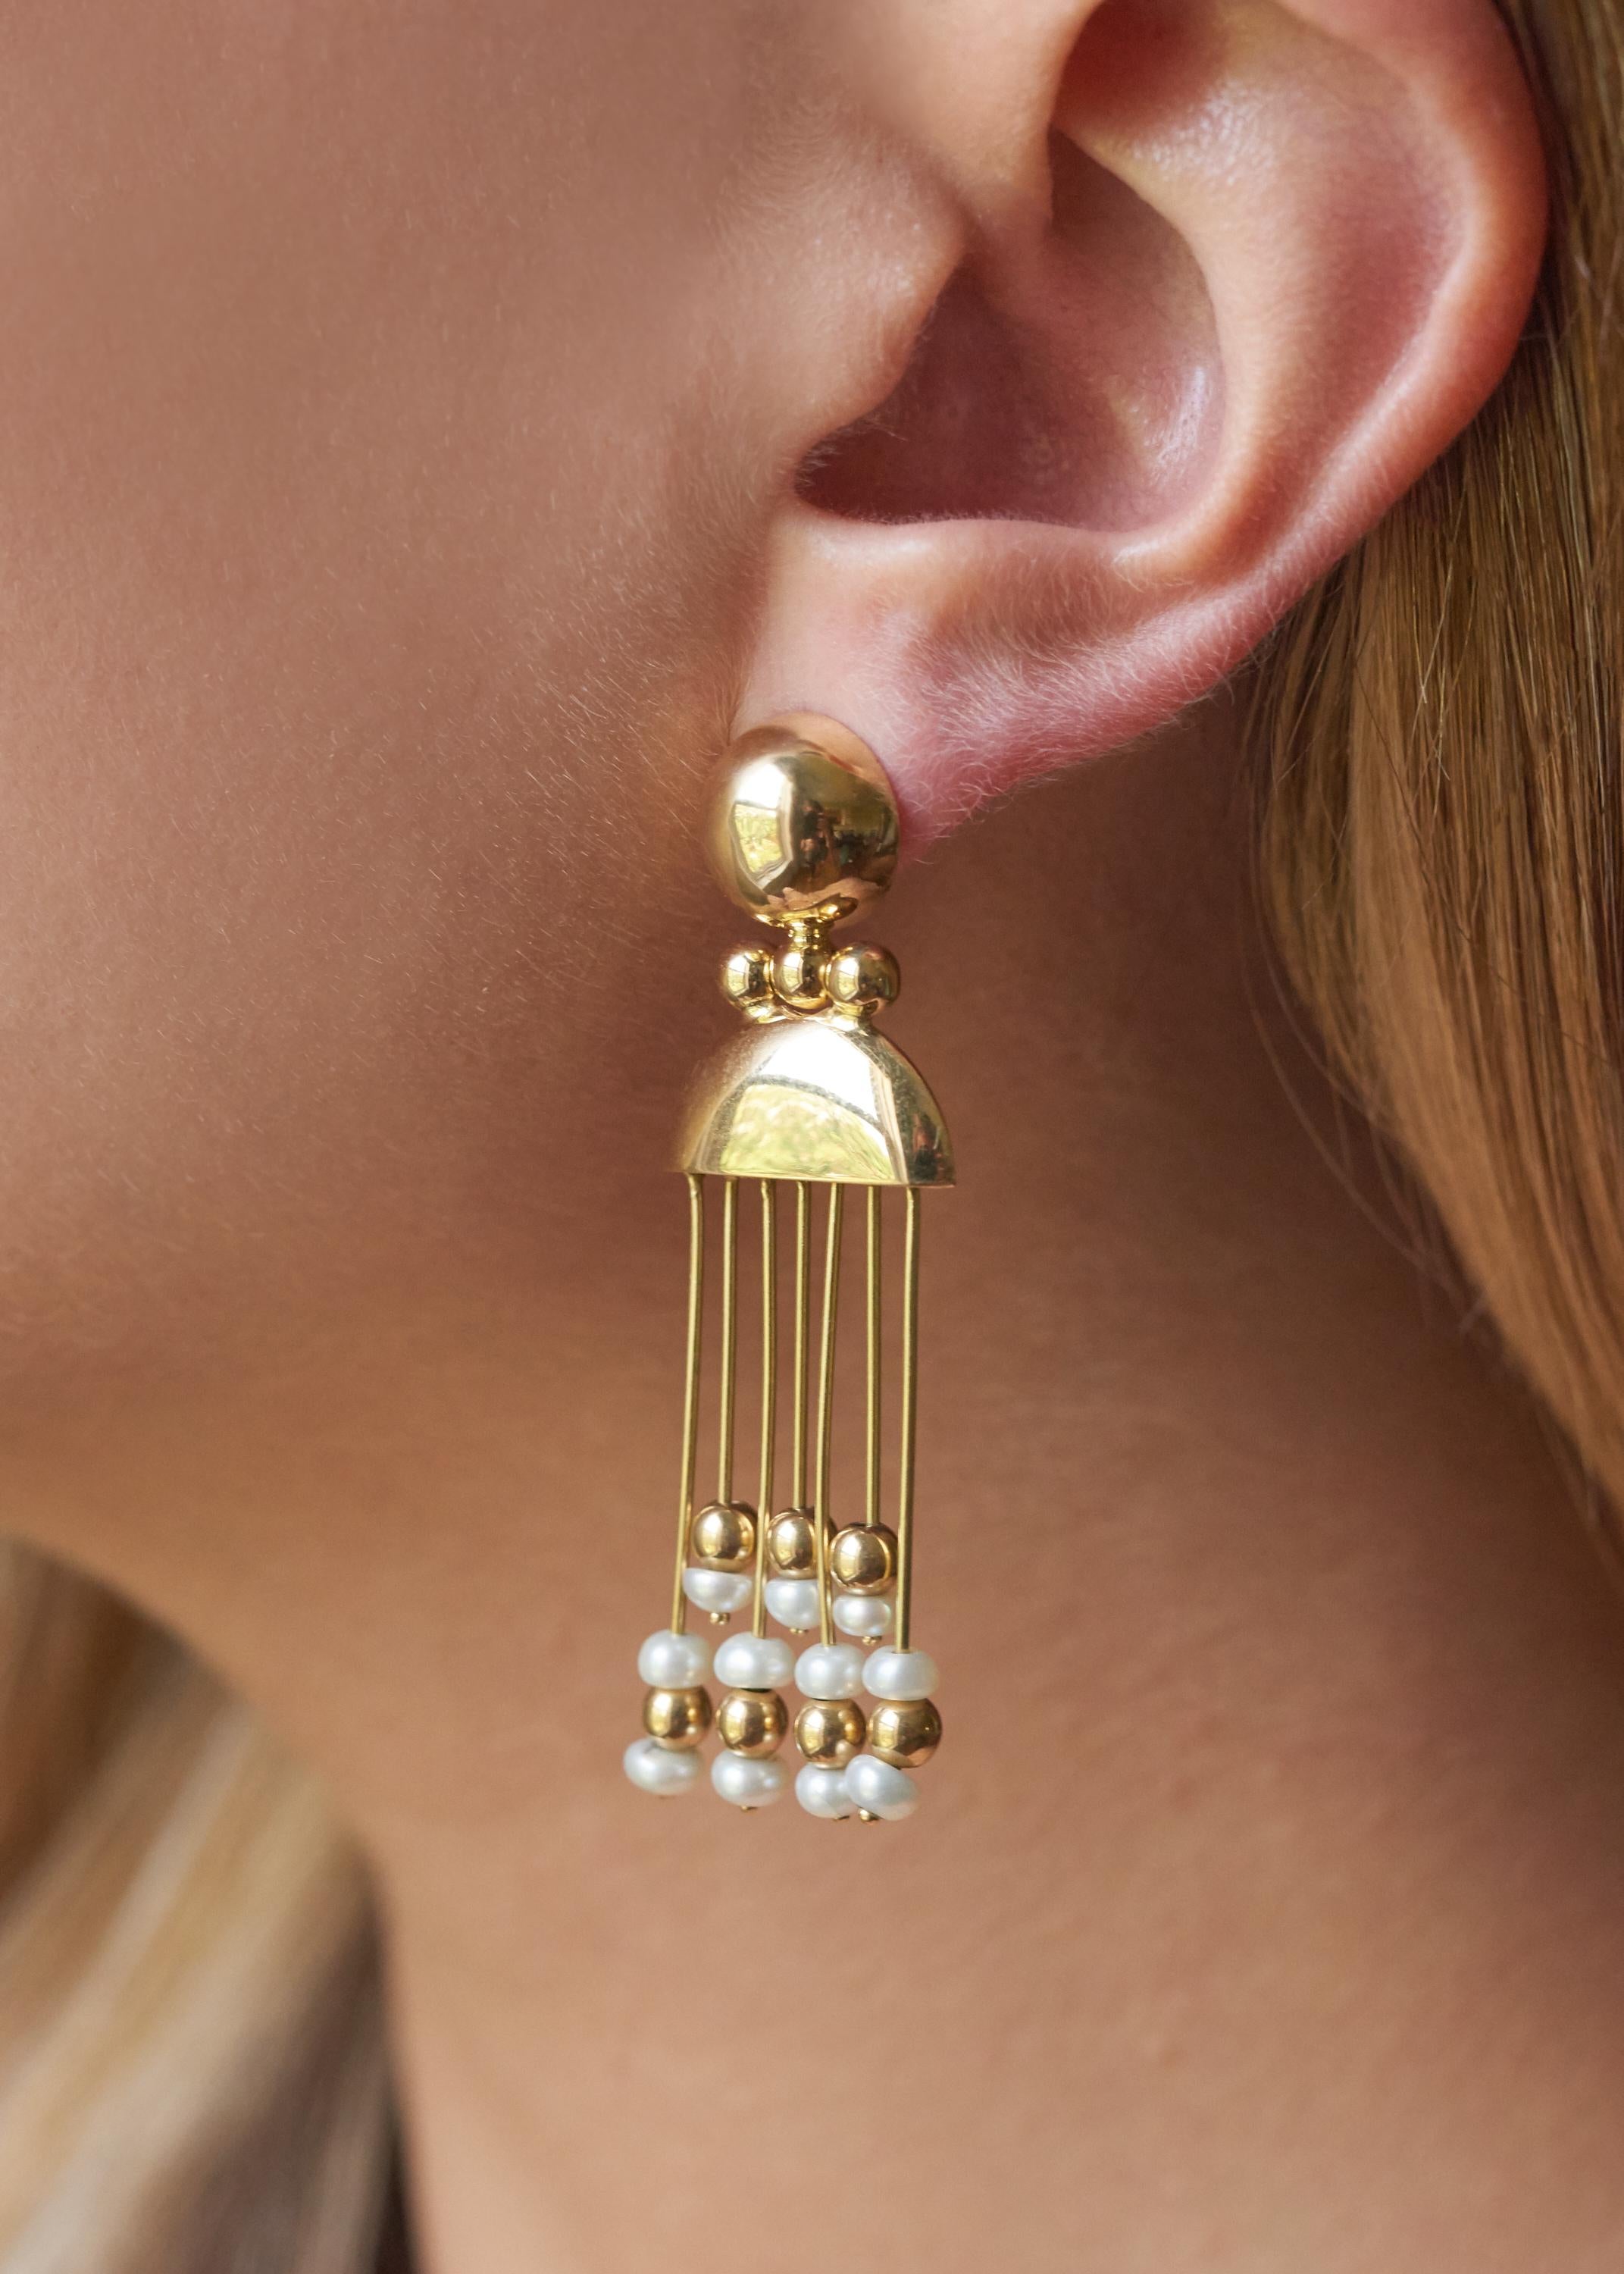 A pair of Italian pearl and 18 karat gold fringe earrings.
The earrings are stamped 750 and Italian Registered Trademark Number 805 VI, for Vicenza manufacture. 
Post packs for pierced ears. 
These are a romantic pair of good length that work